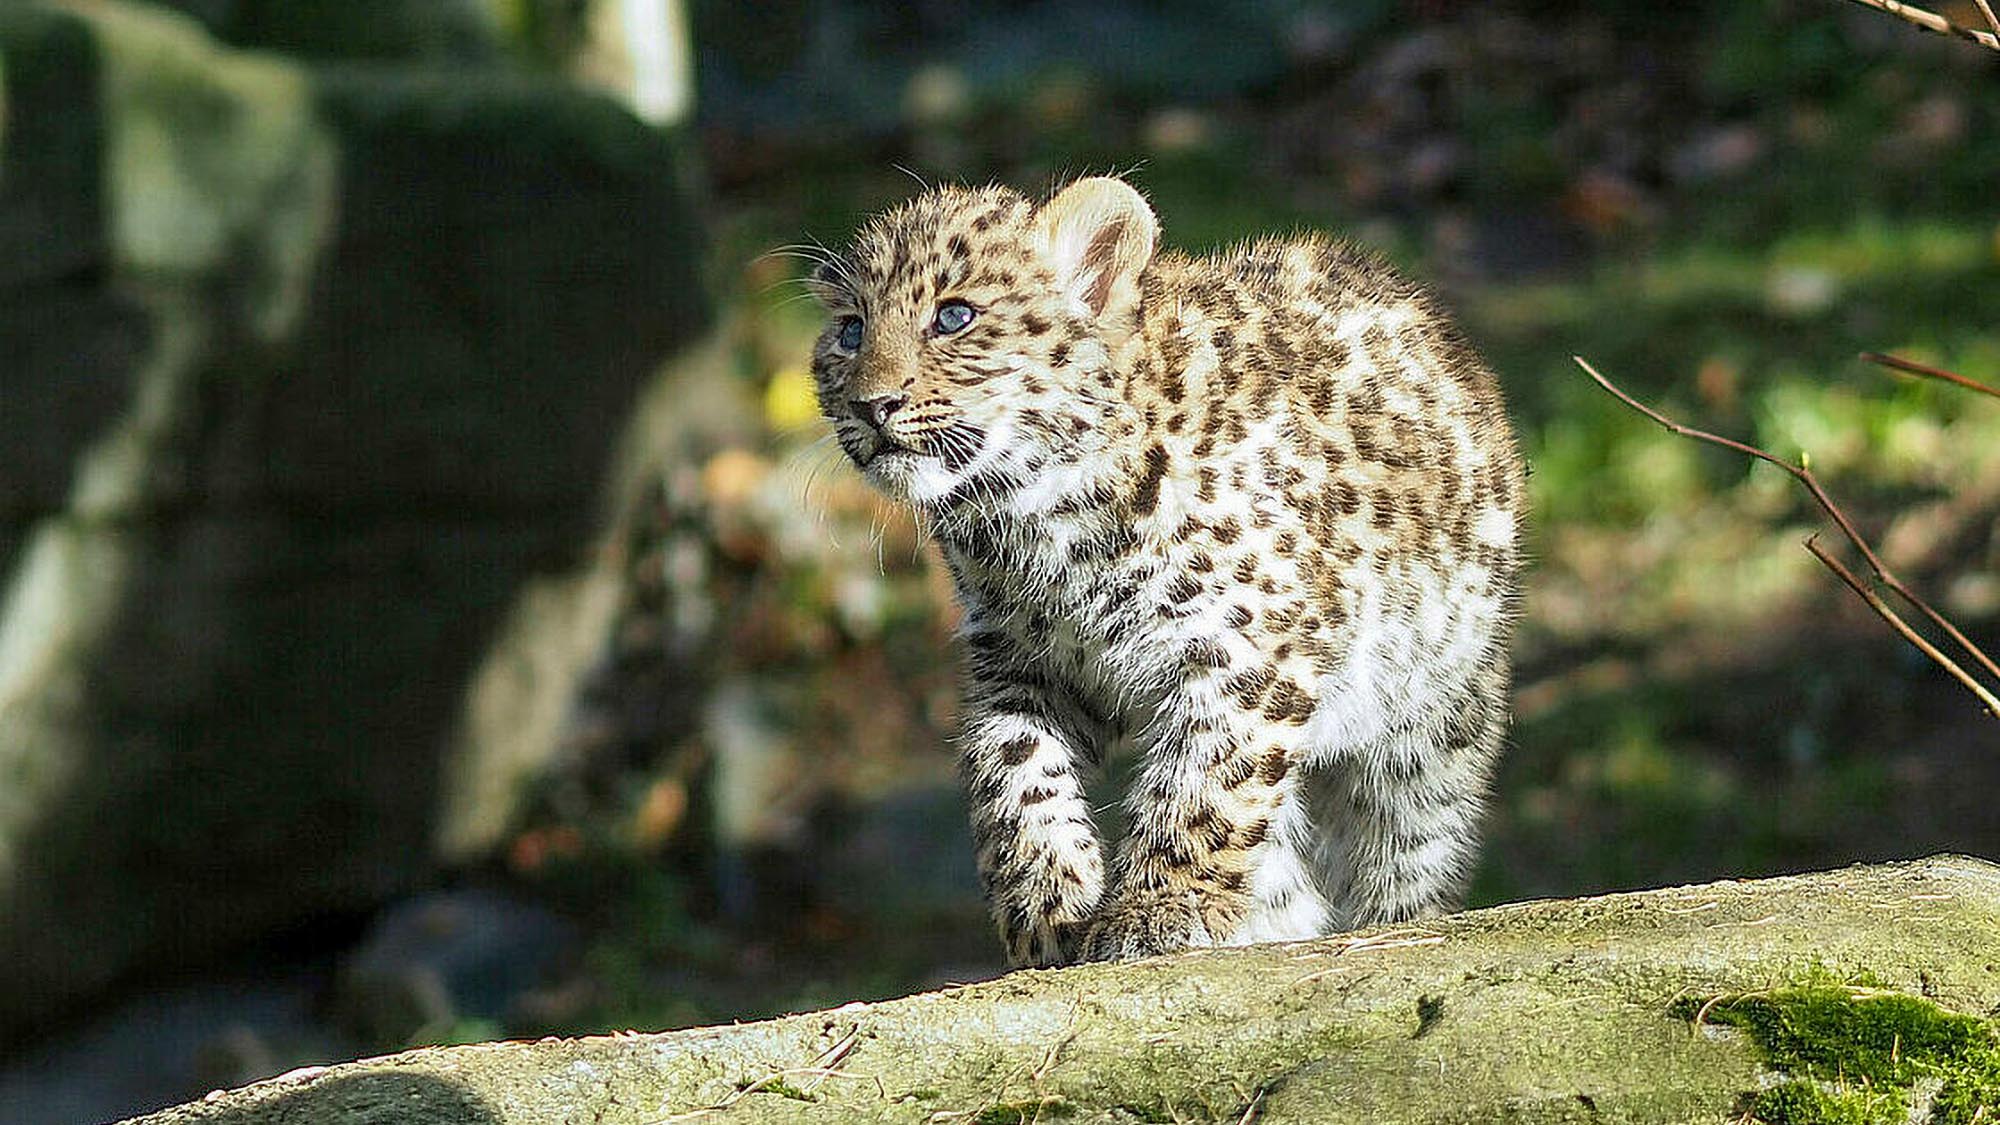 Read more about the article Endangered Amur Leopard Cub Explores Outdoor Enclosure With Watchful Mum